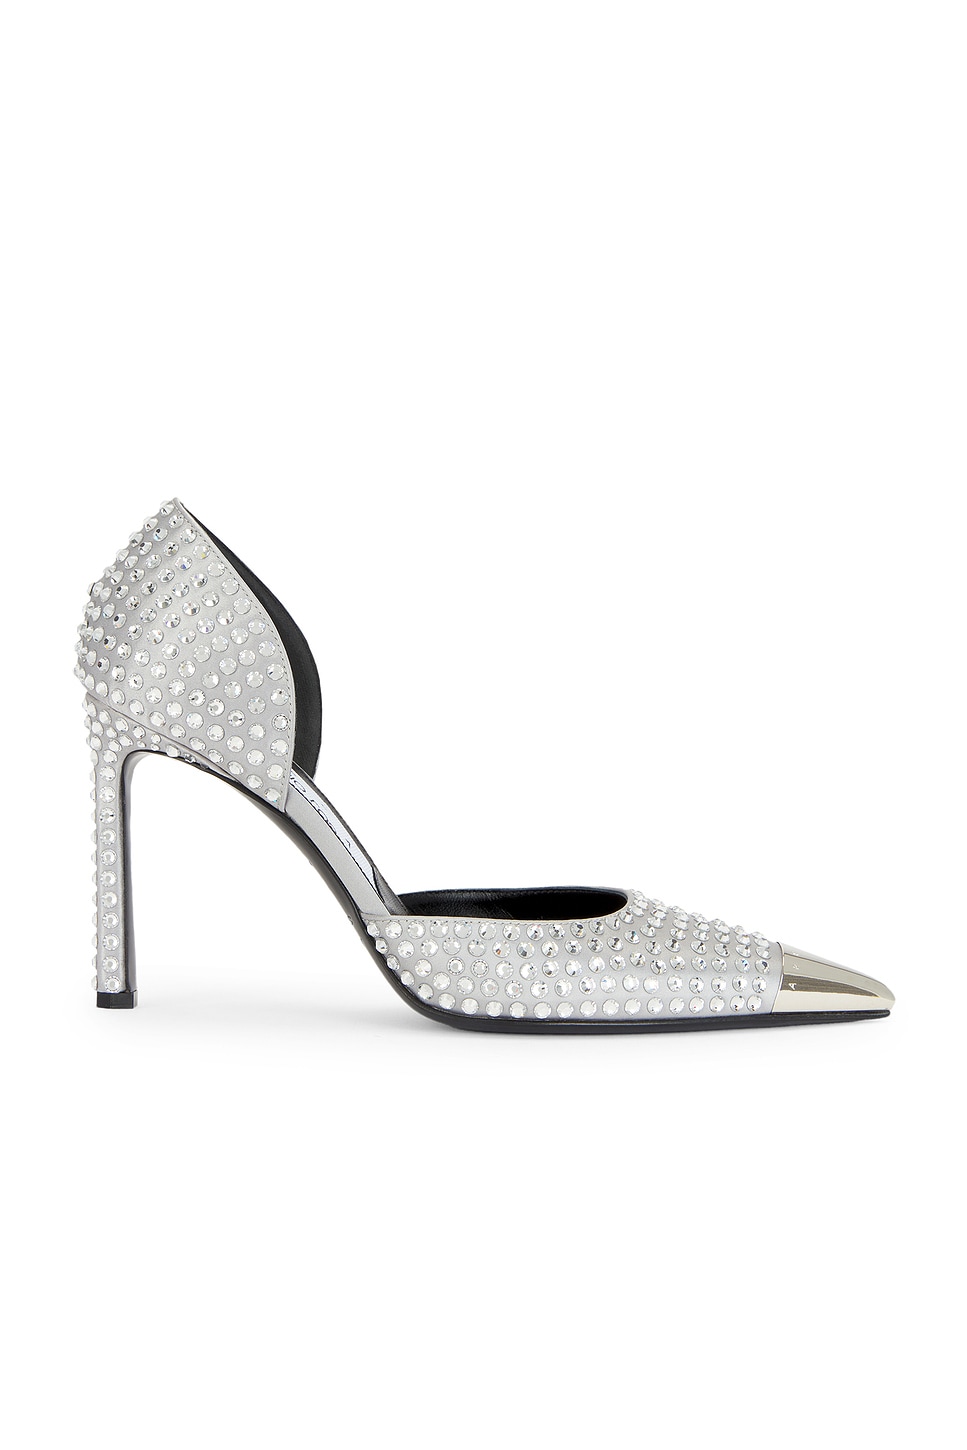 Image 1 of AREA X Sergio Rossi 95 Pump in Silver & Crystal